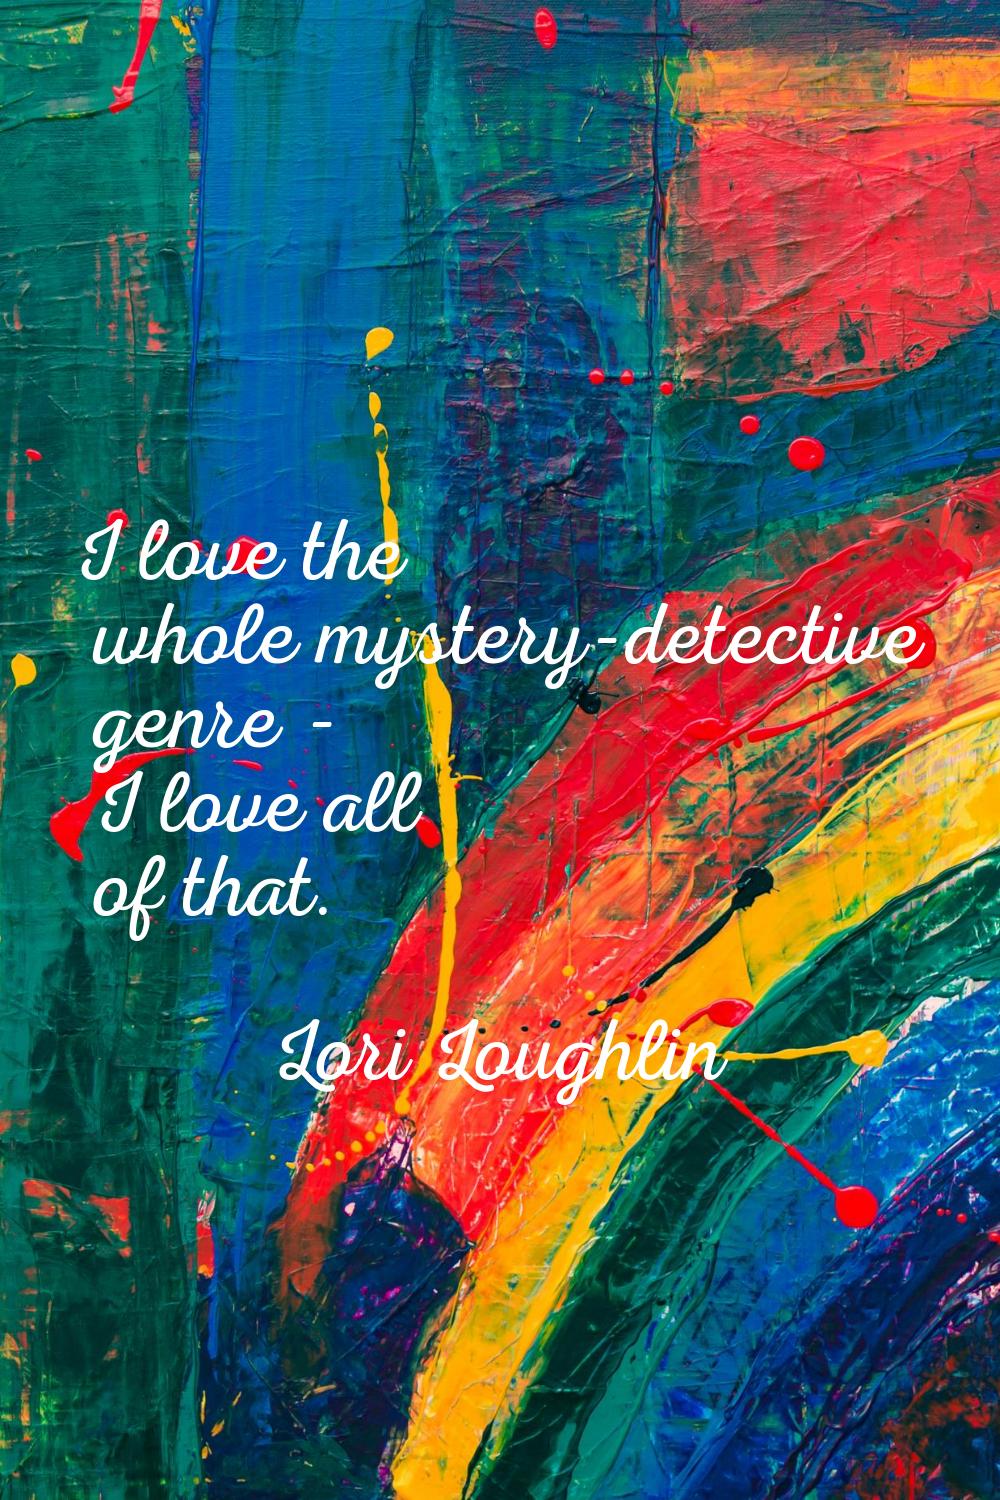 I love the whole mystery-detective genre - I love all of that.